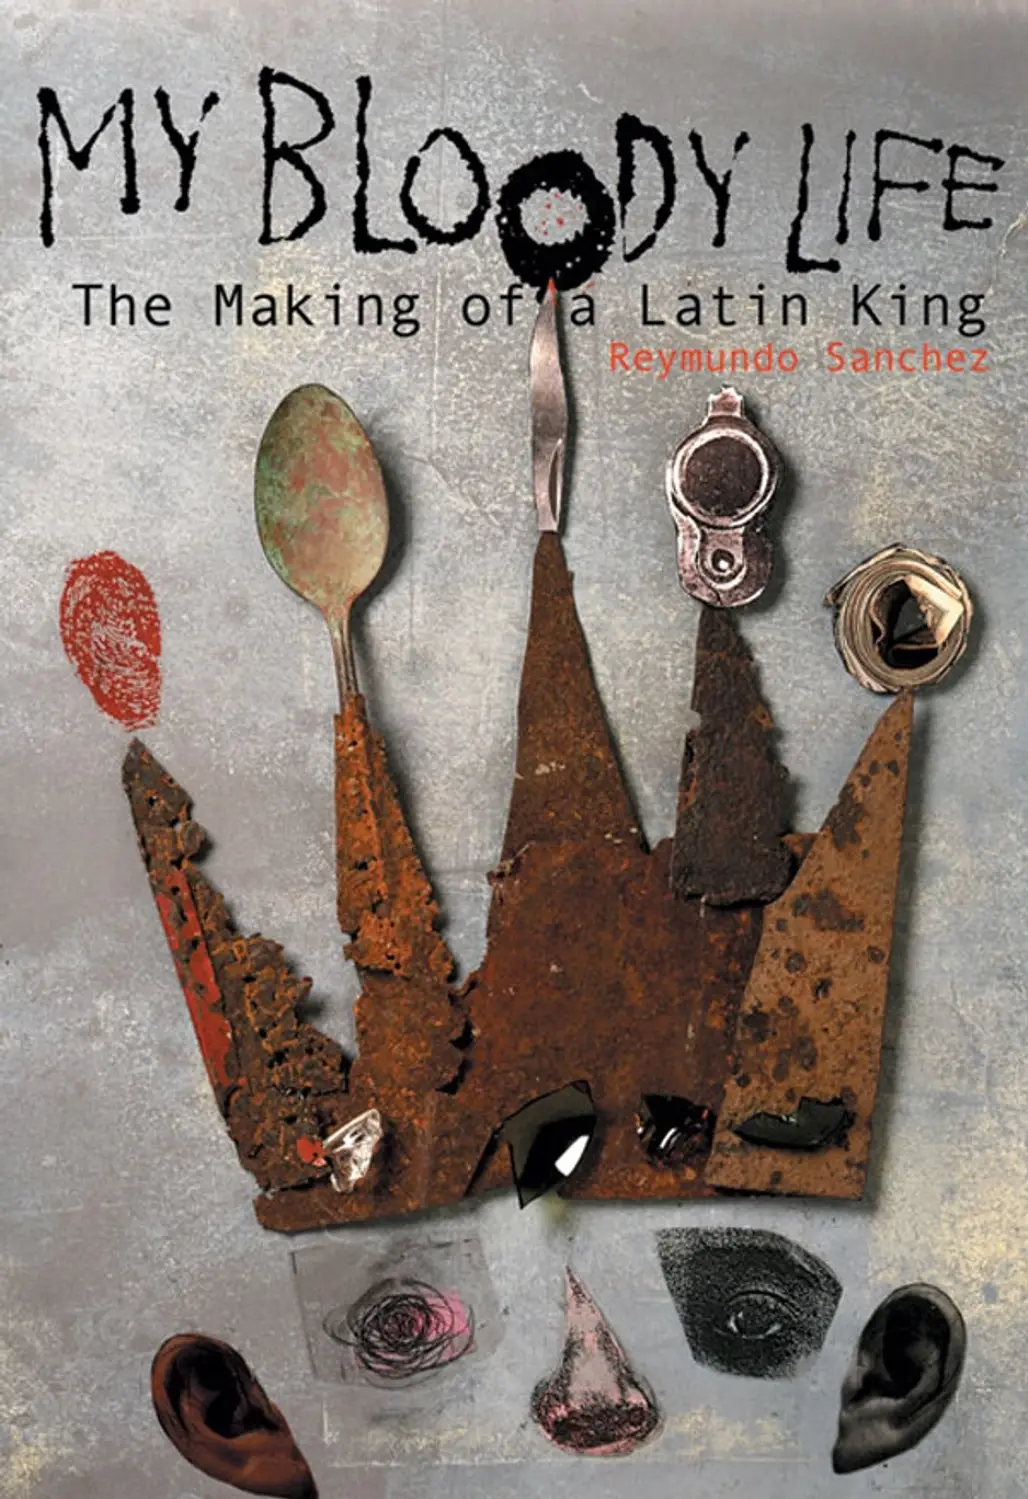 My Bloody Life, the Making of a Latin King by Reymundo Sanchez